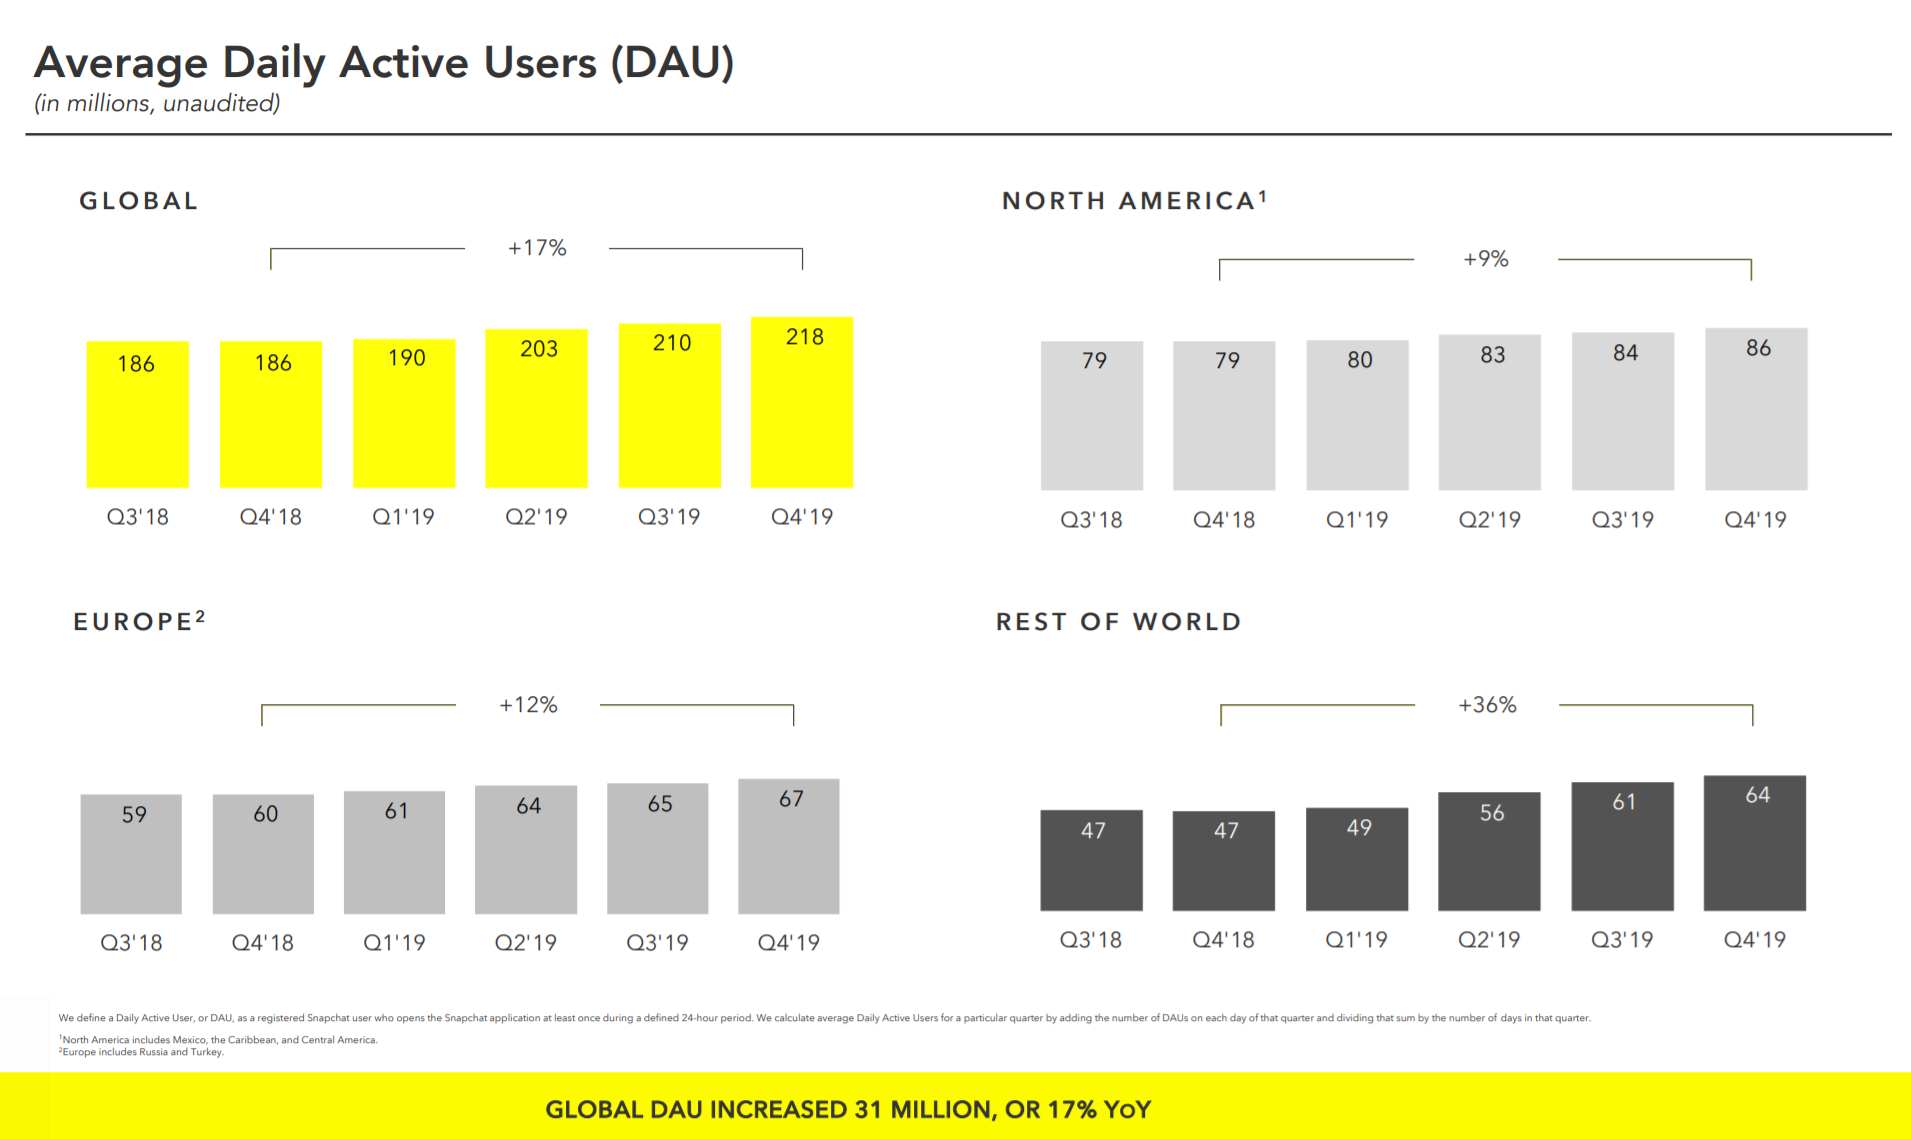 Snapchat reached 218 million daily active users